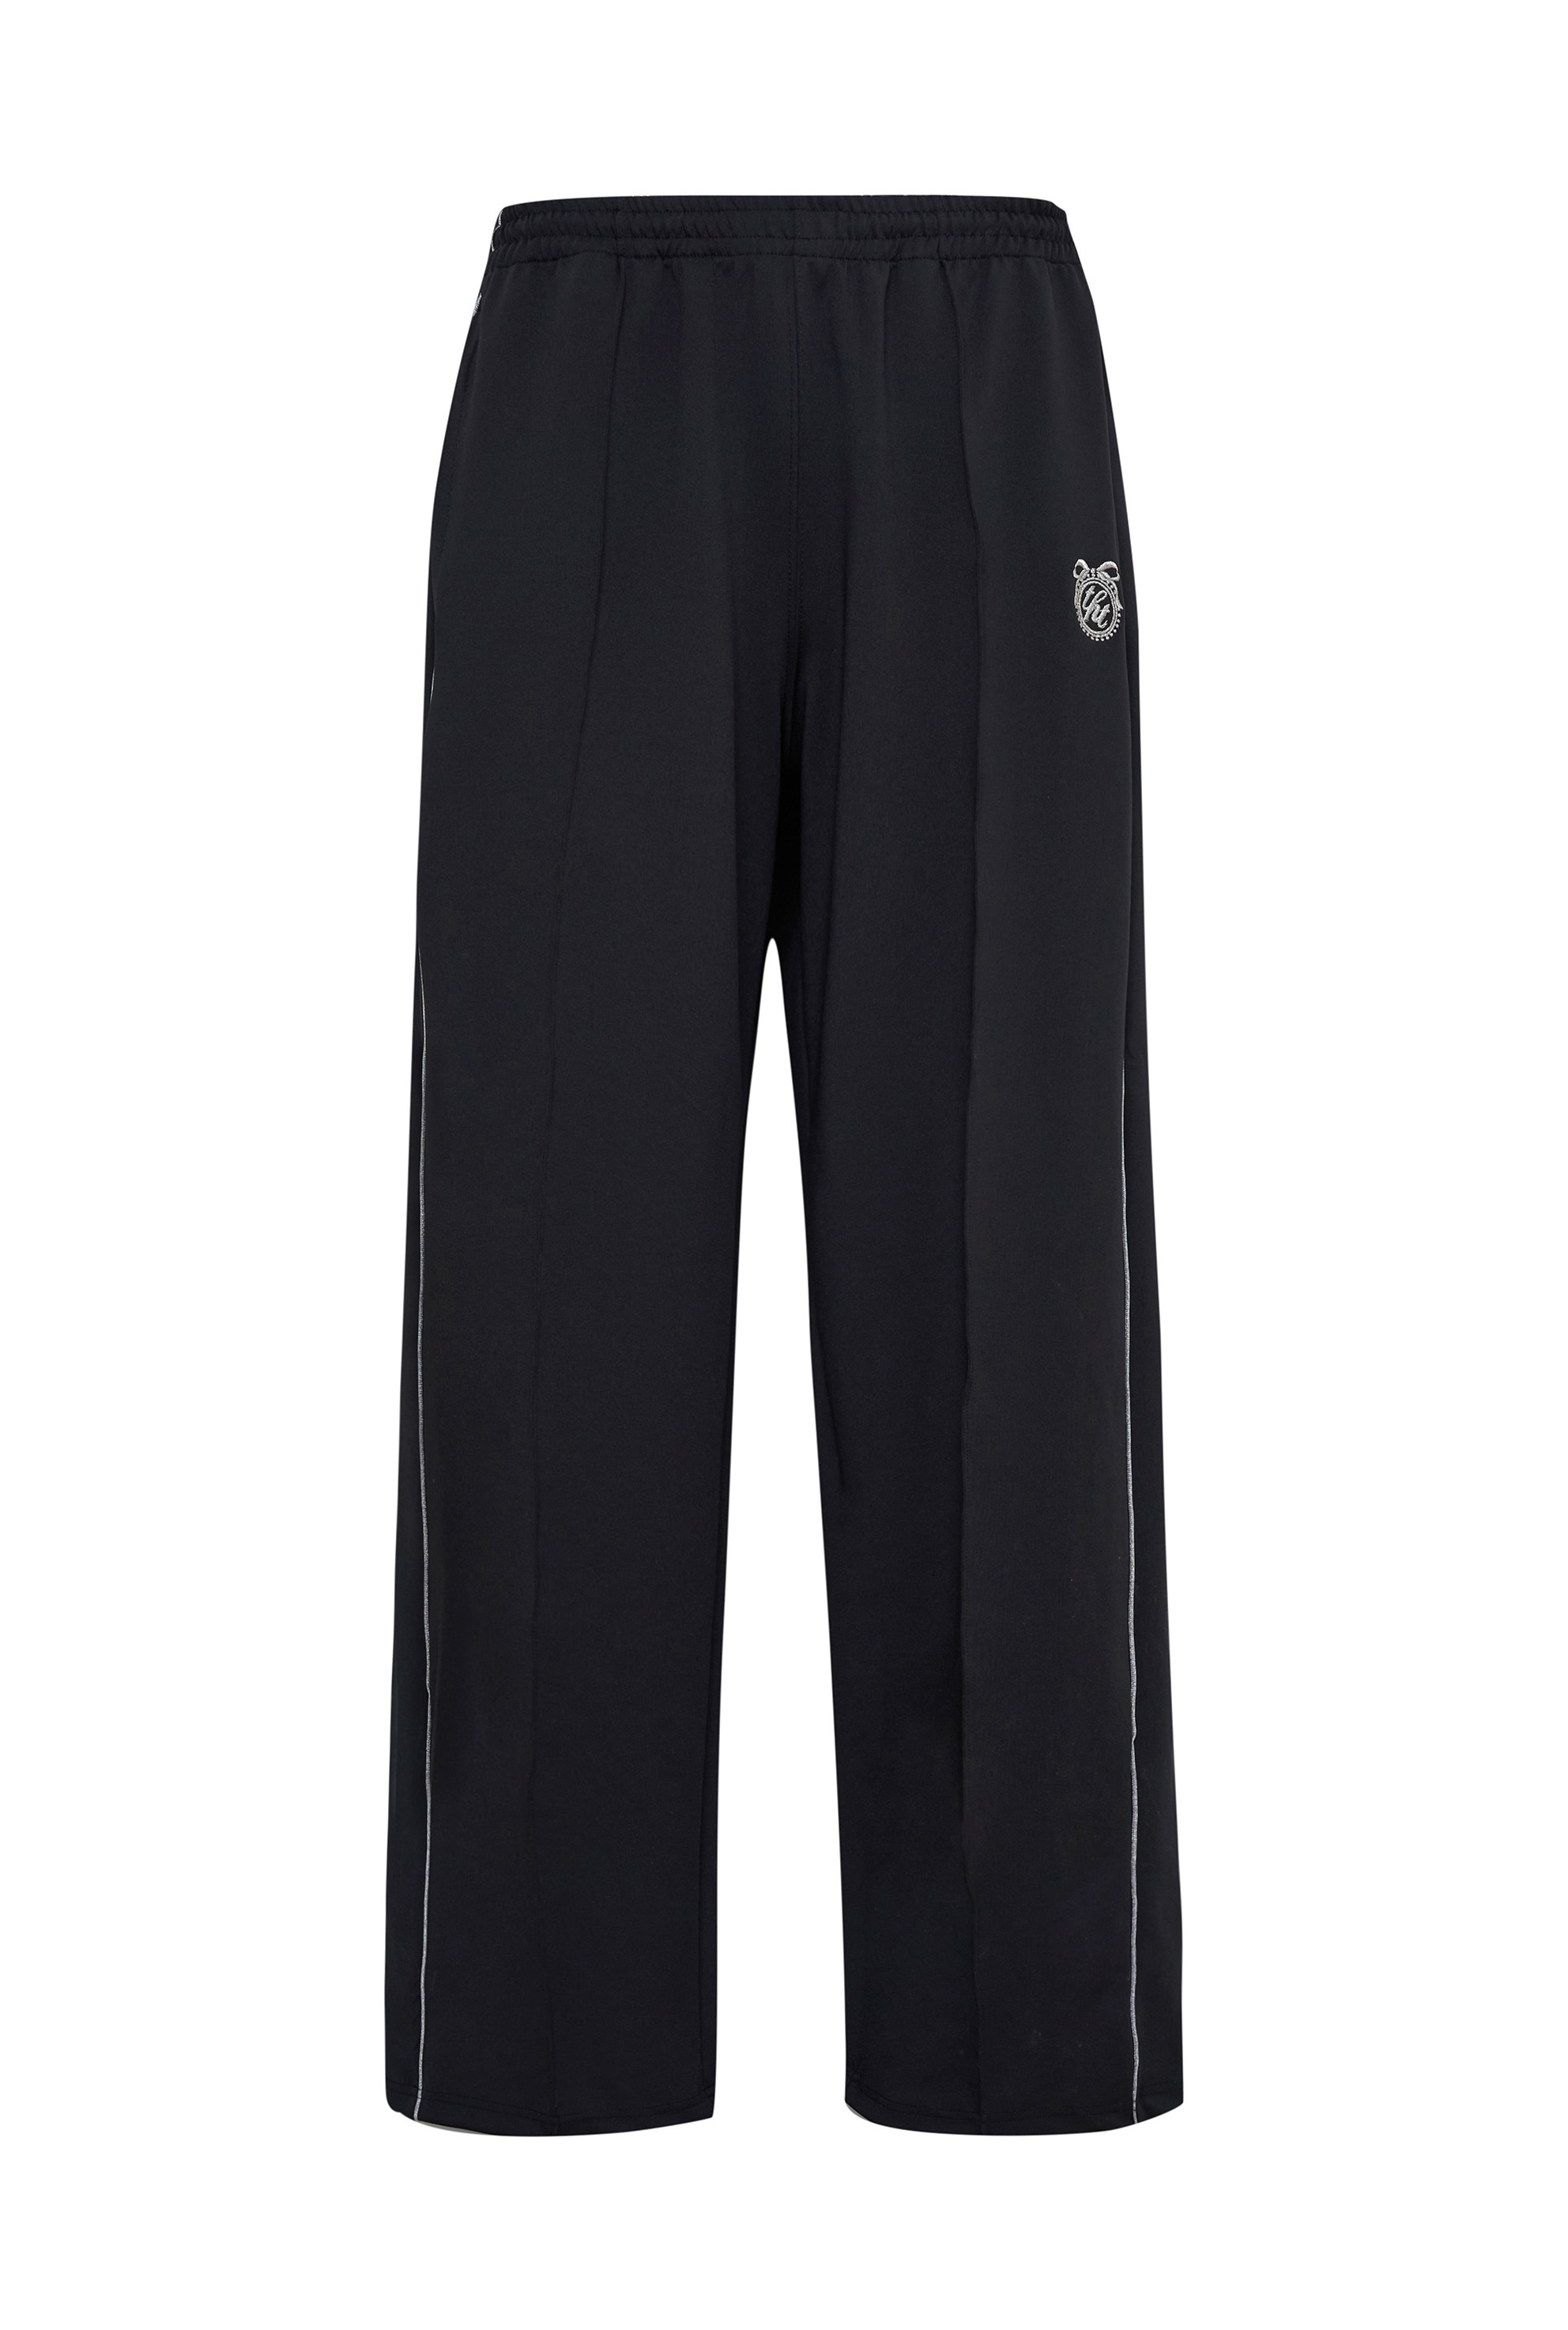 Empire track pants oversized fit